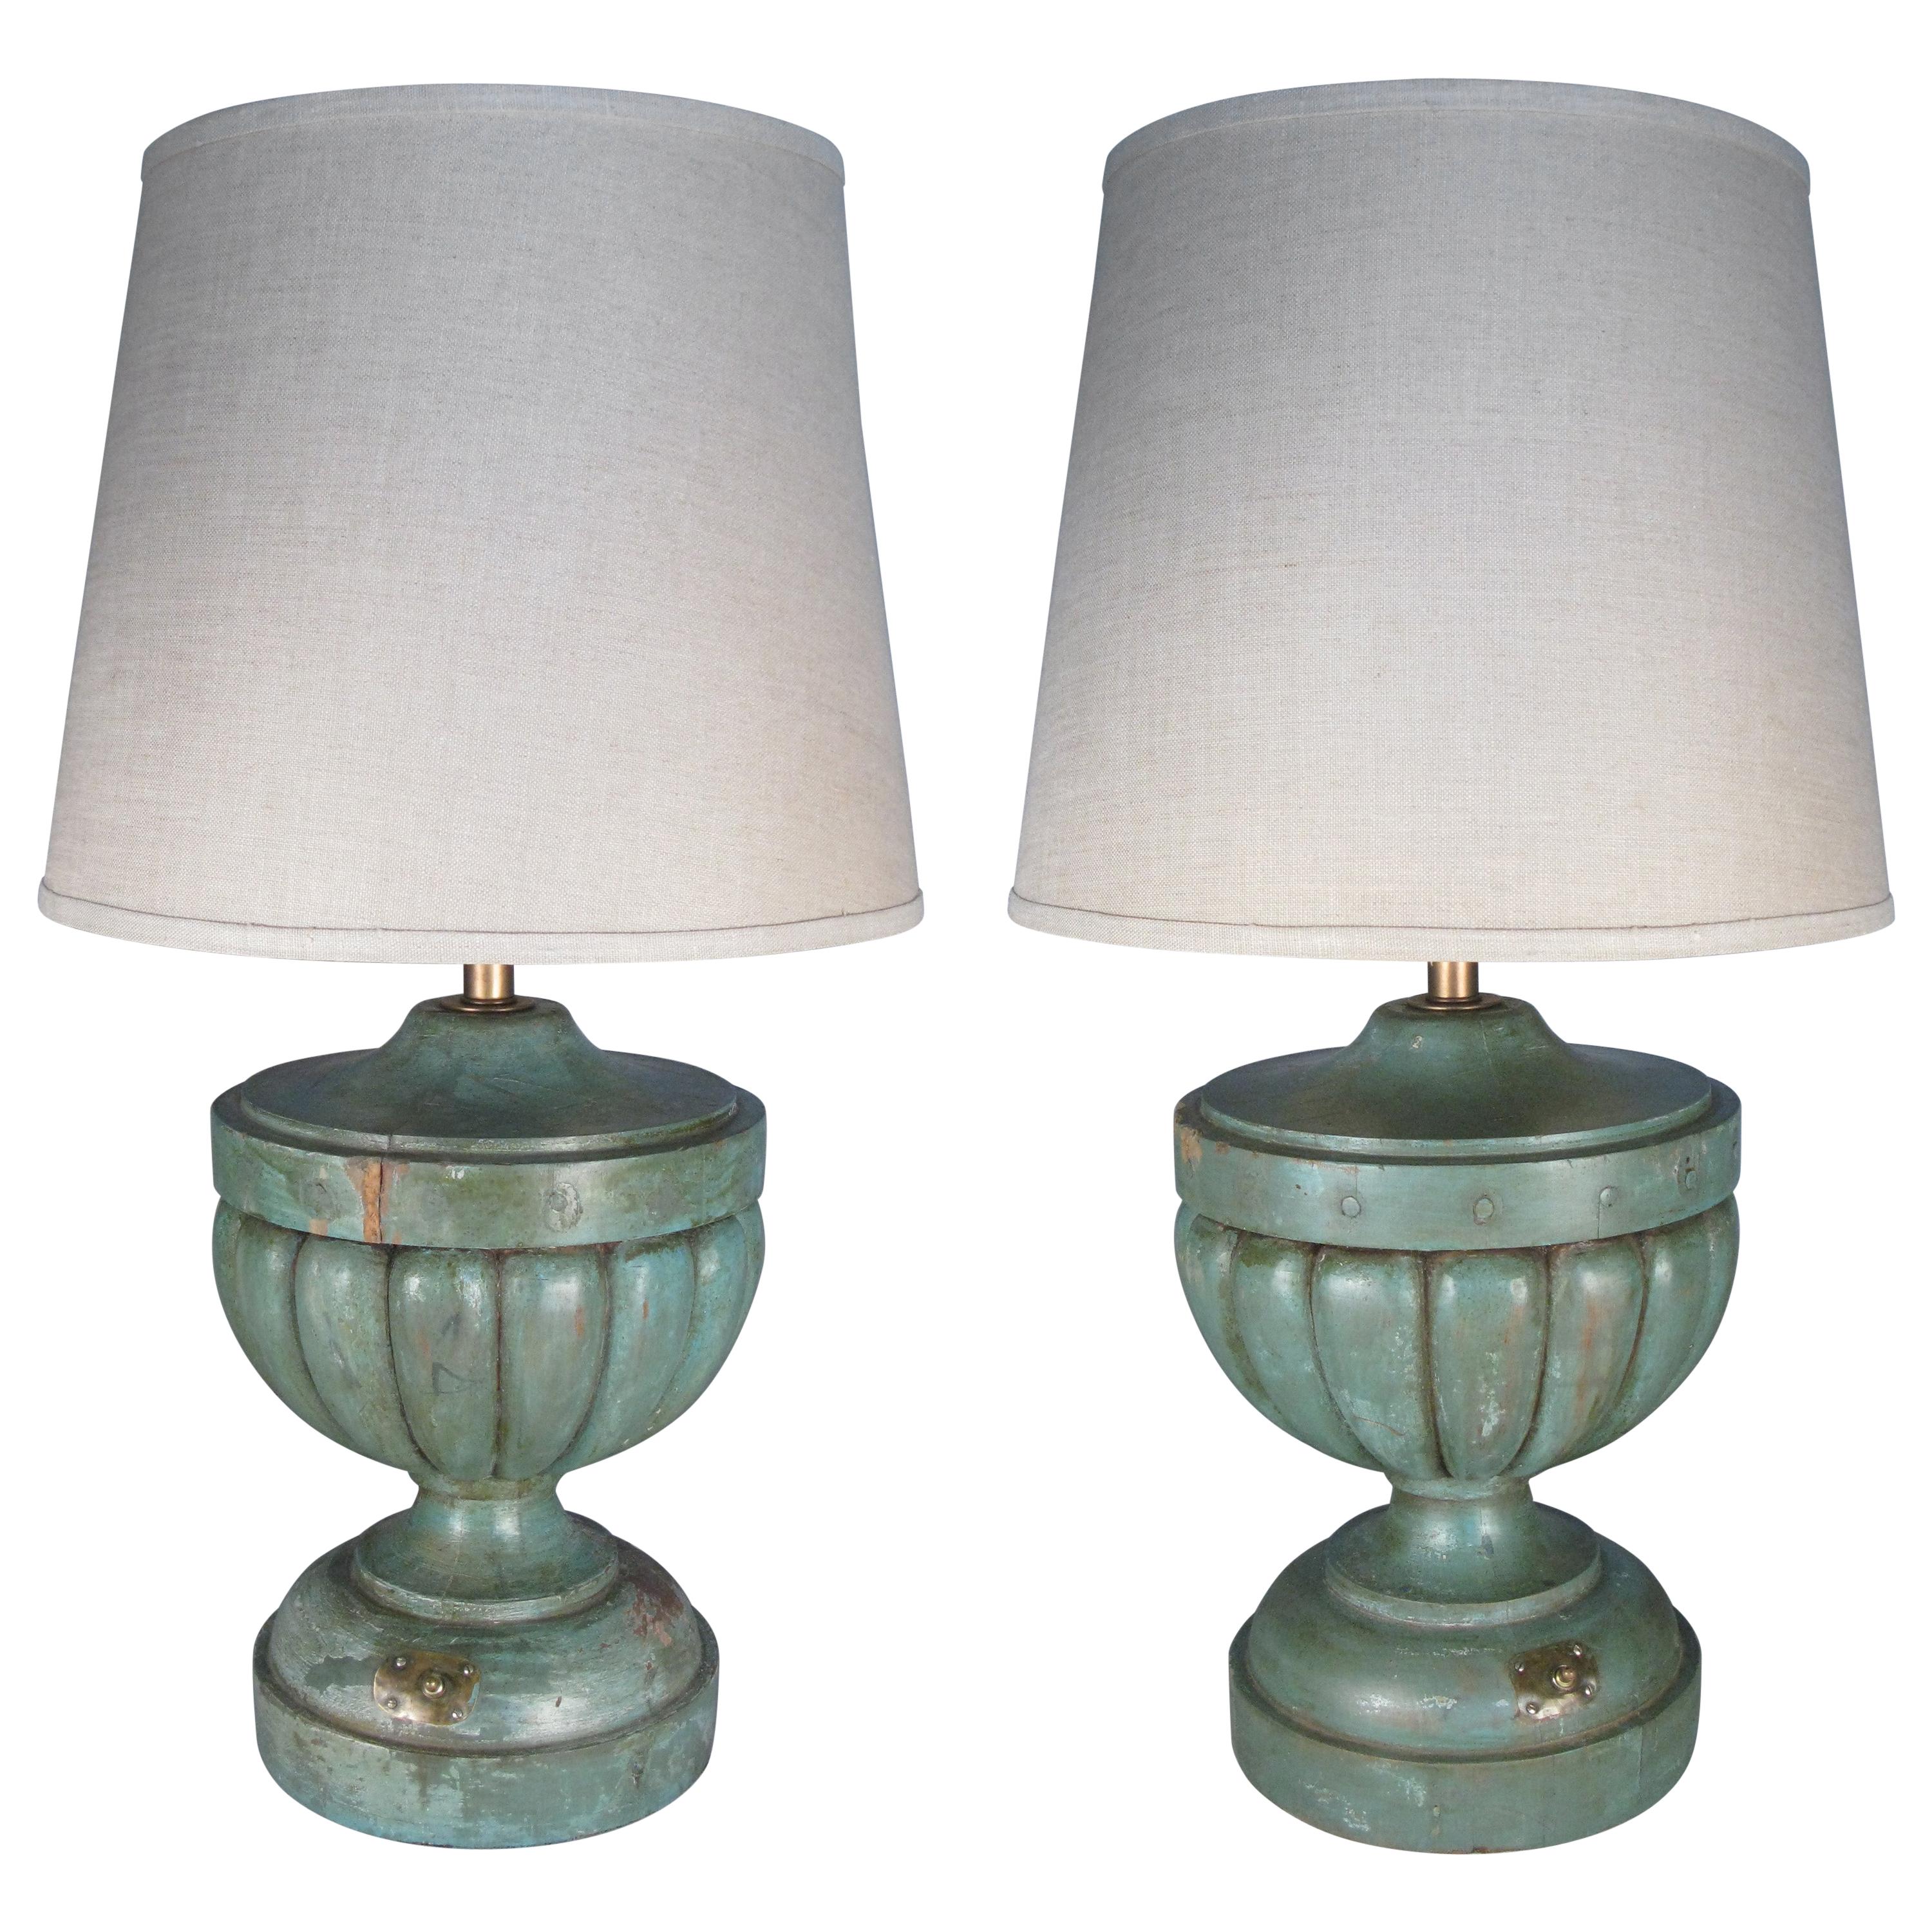 Pair of Antique Painted Wood Table Lamps